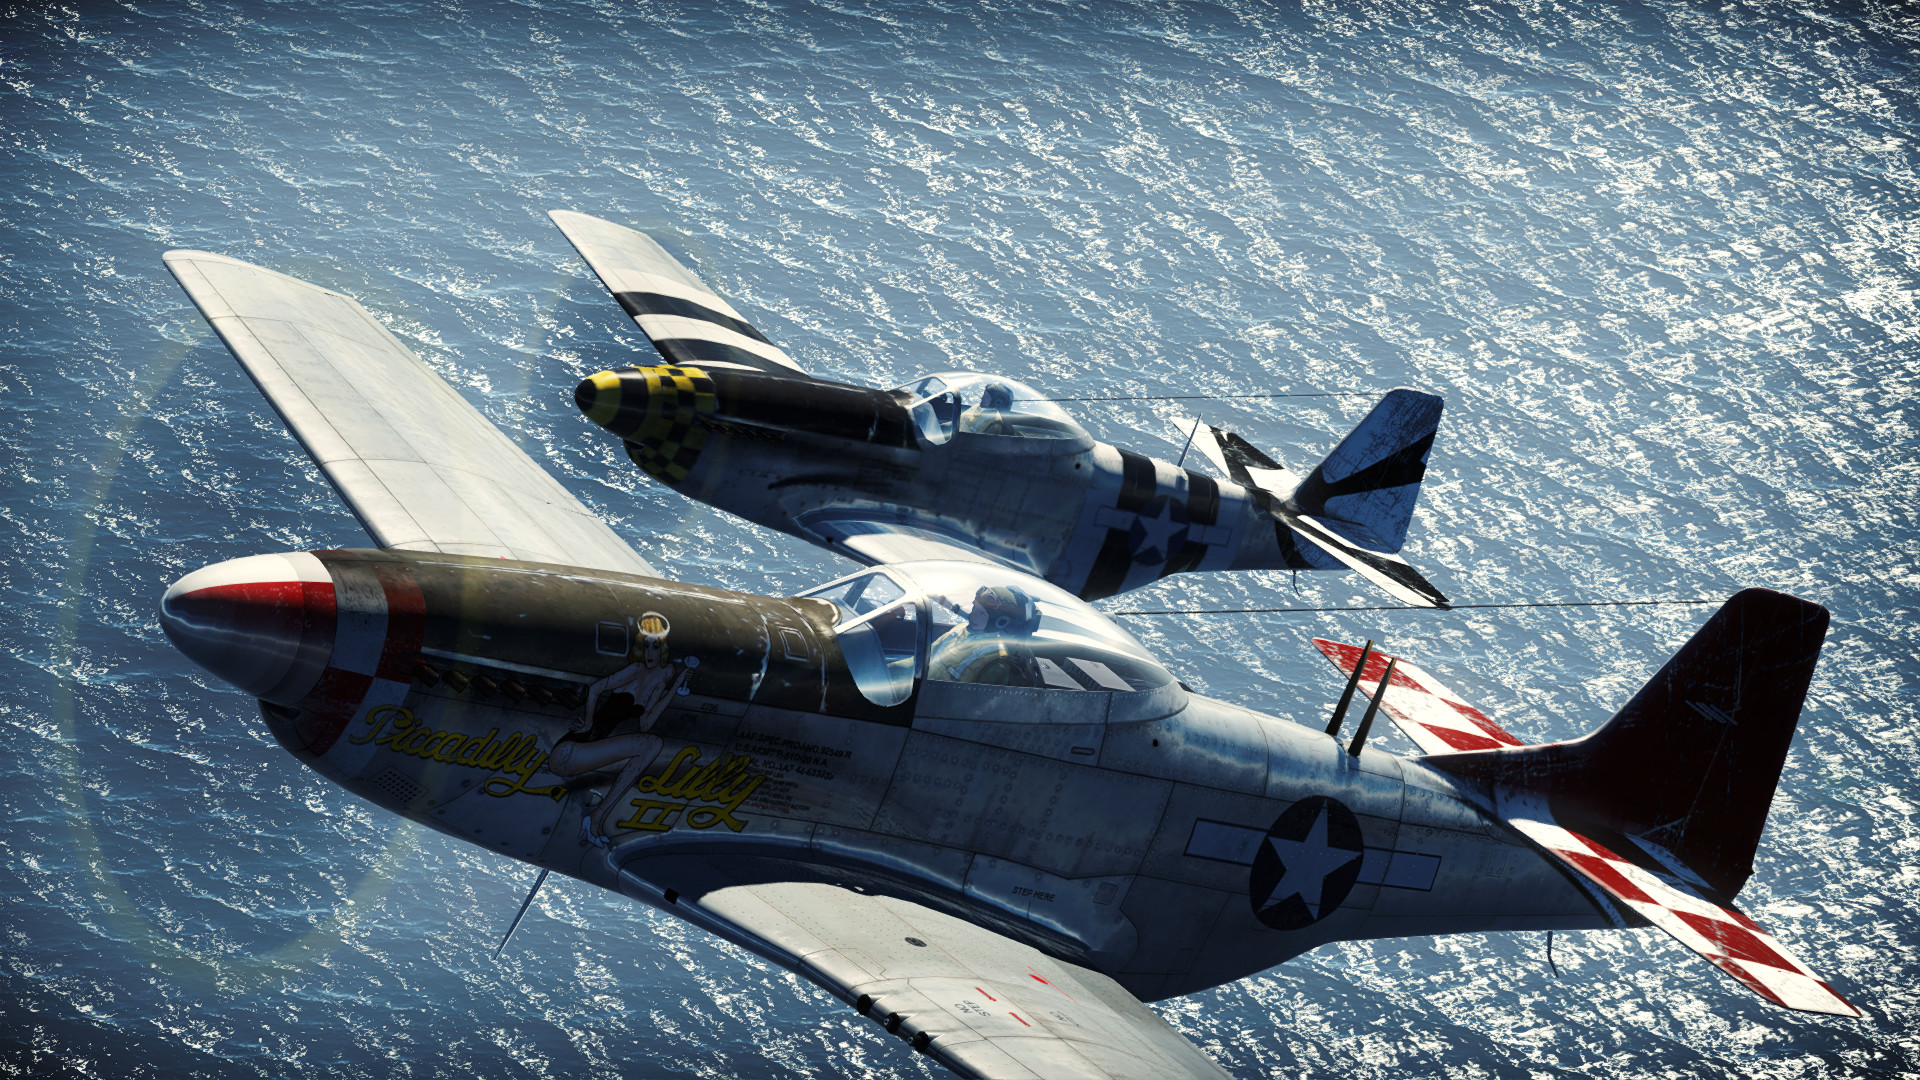 war thunder download size ps4